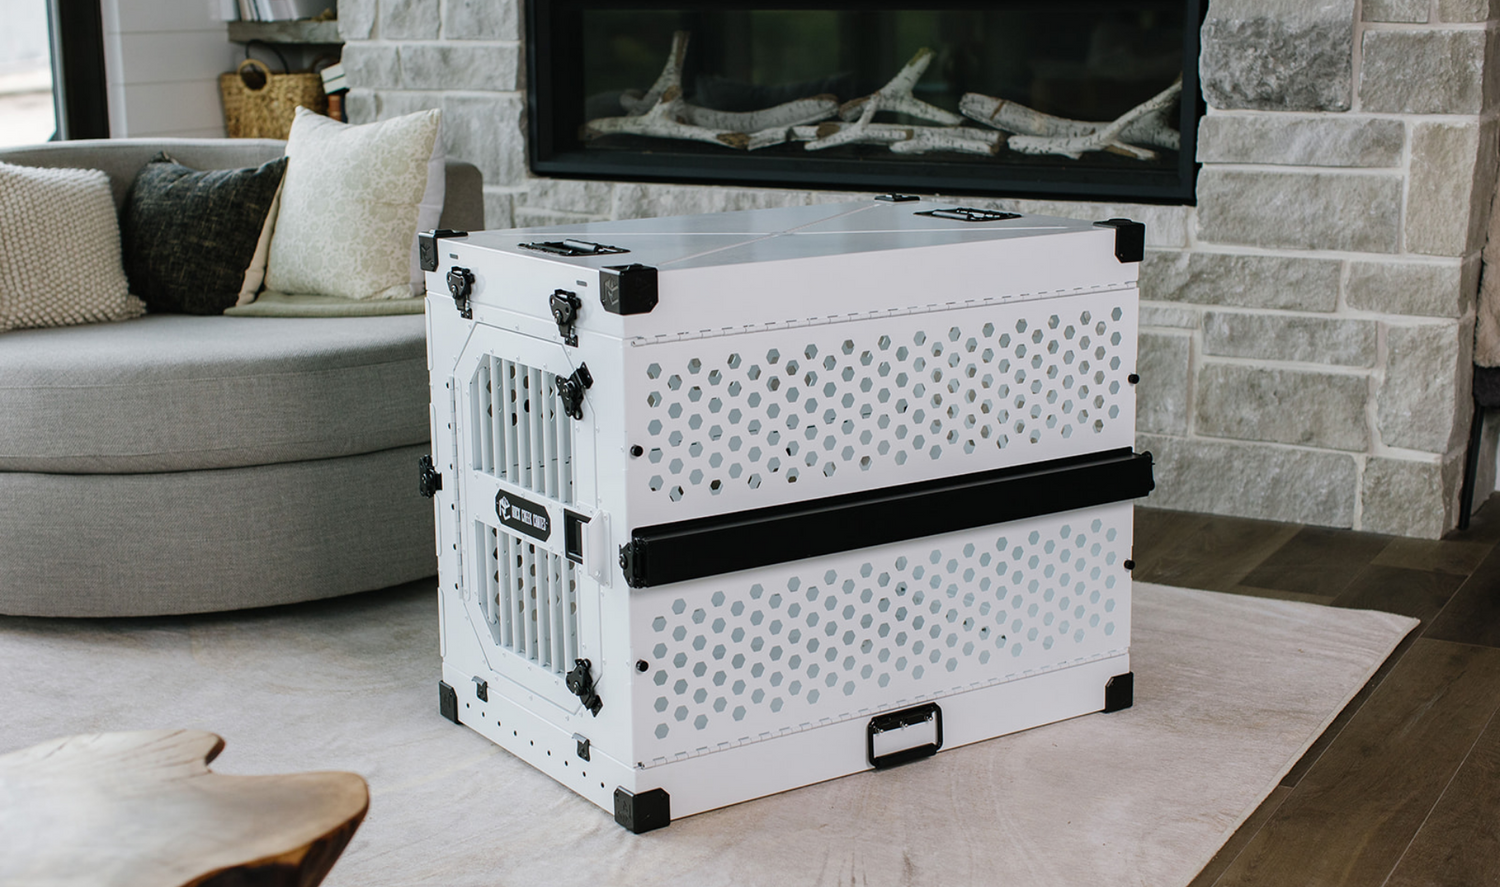 A Stronger Safer Dog Crate - Rock Creek Crates